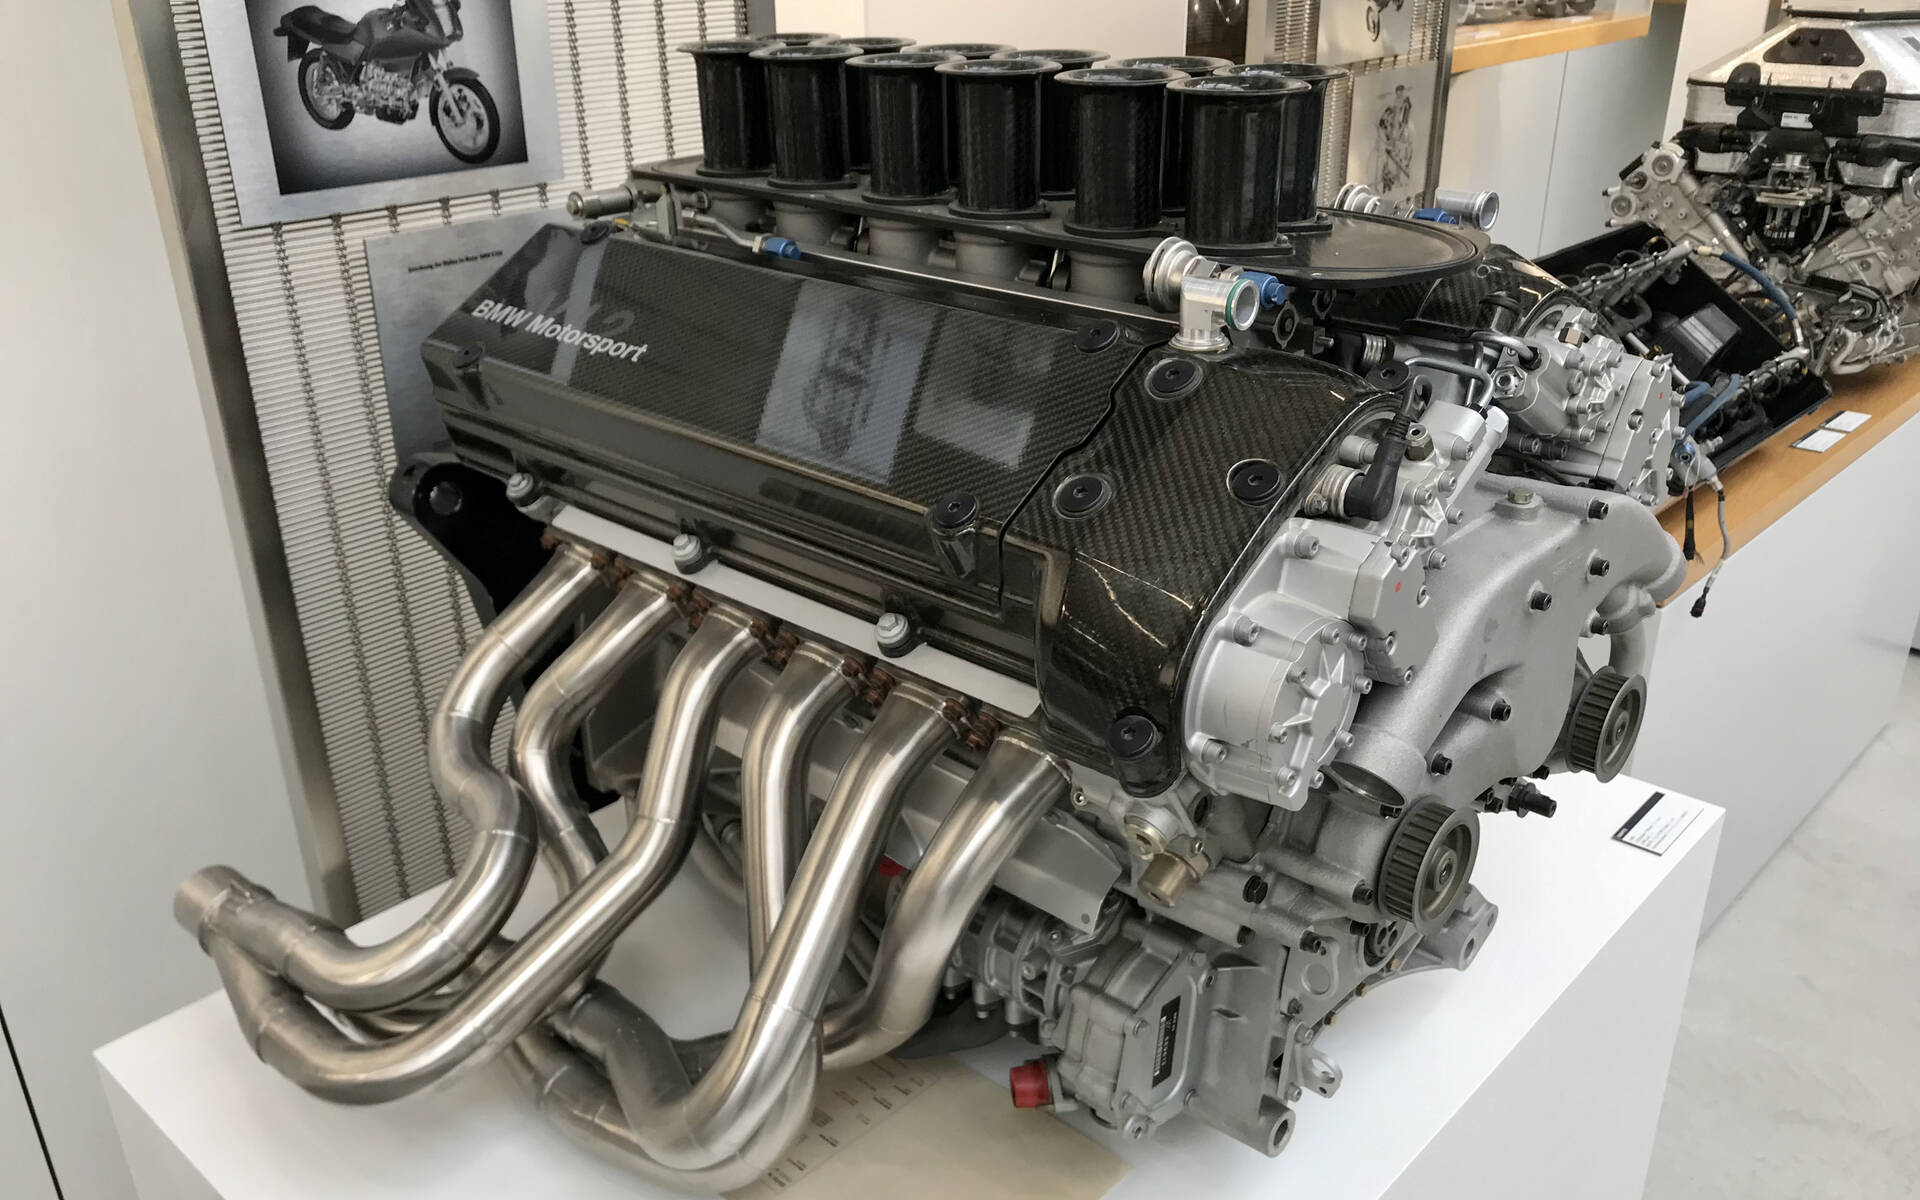 <p>6.0L V12 engine from BMW V12 LMR race car in the late '90s.</p>